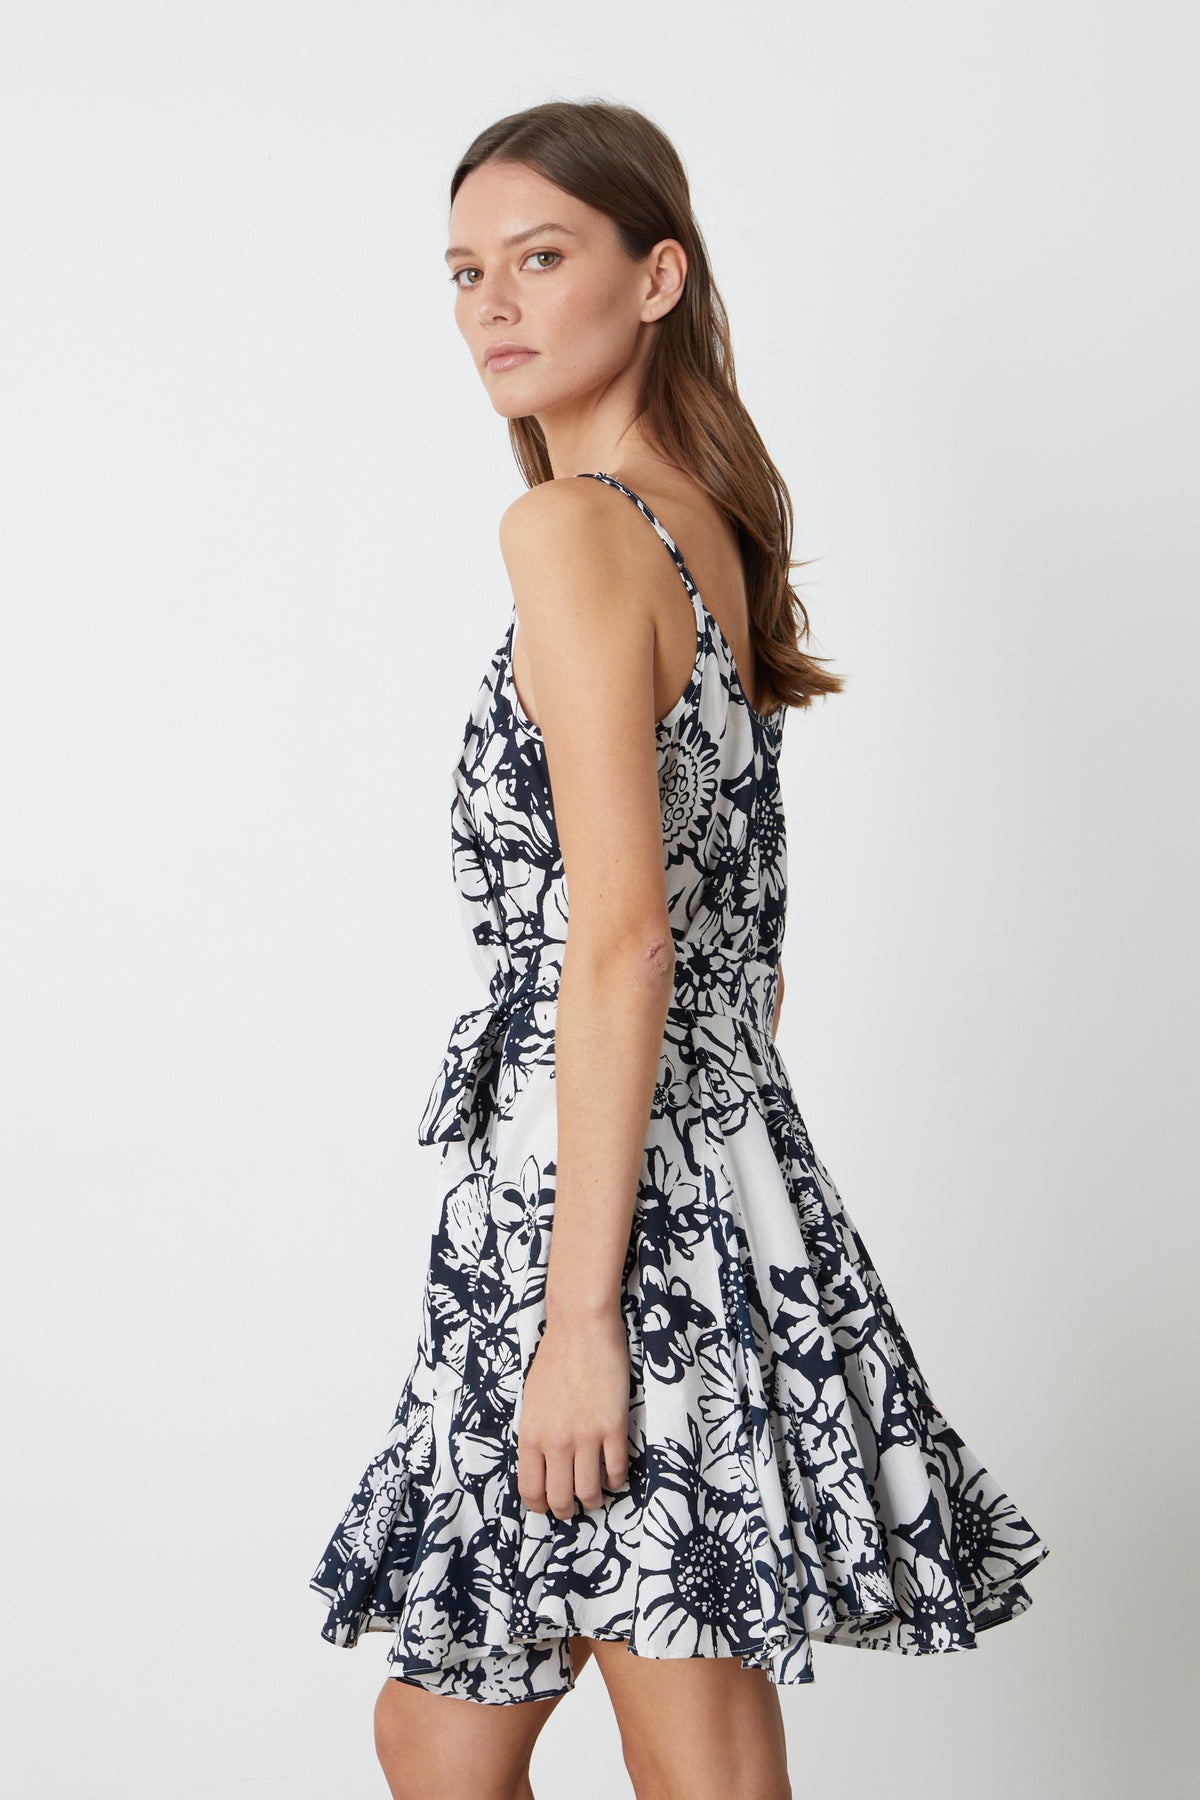   The model is wearing a VIVIAN PRINTED DRESS by Velvet by Graham & Spencer. 